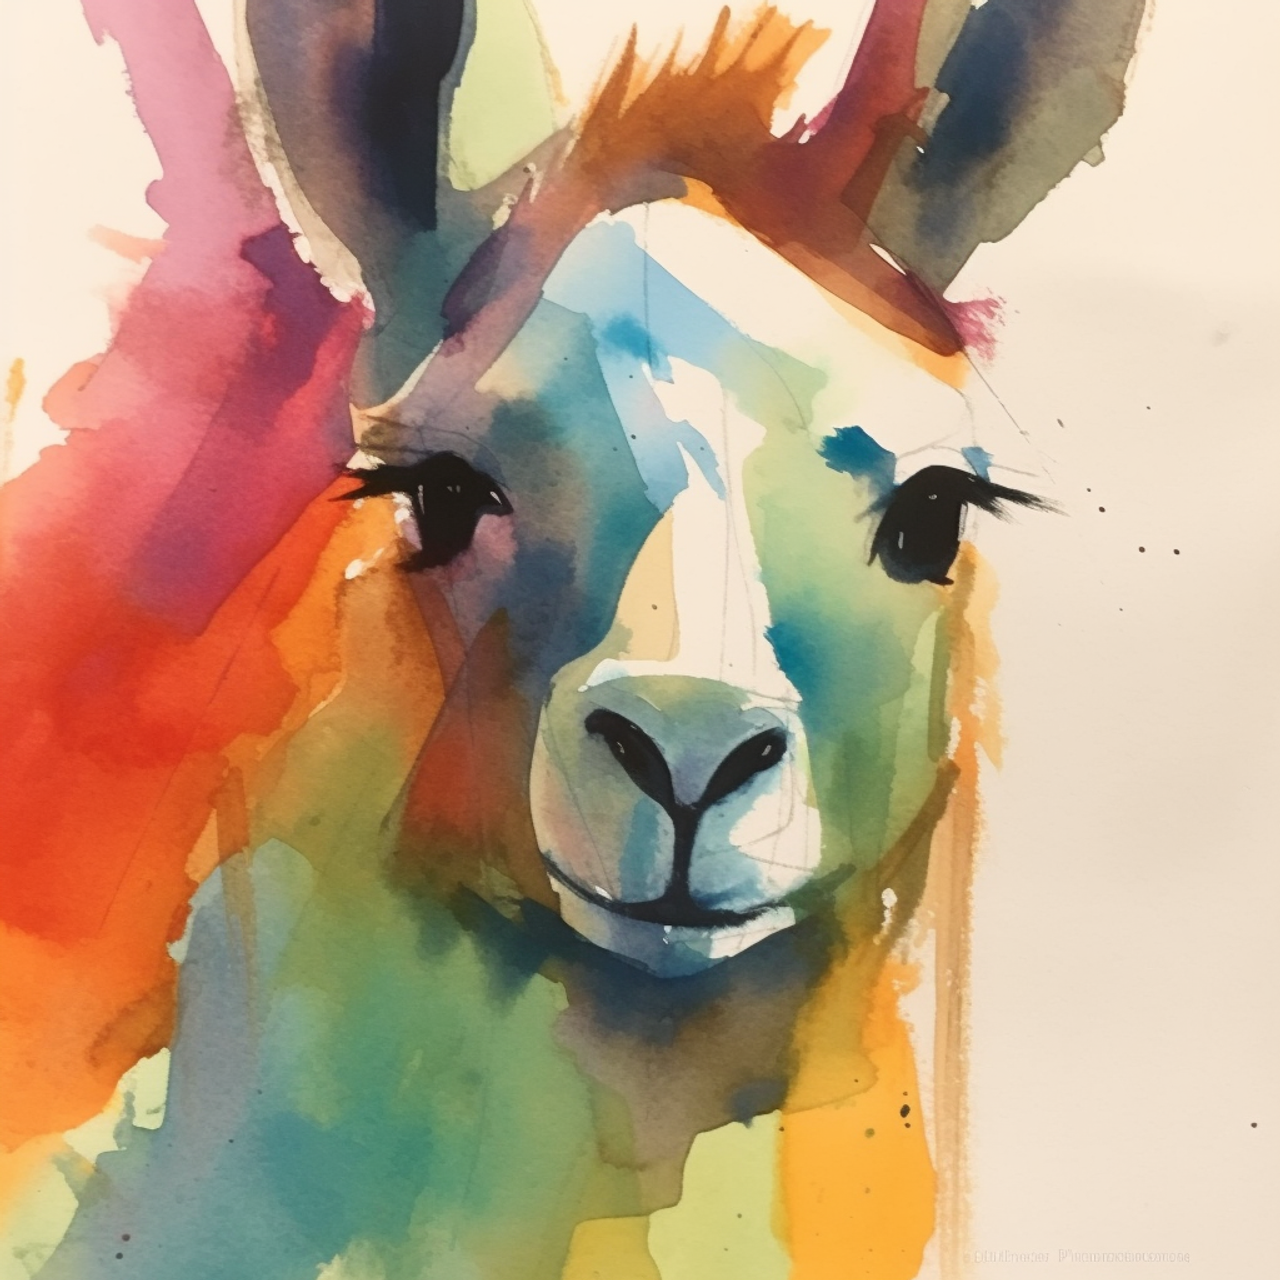 5D Diamond Painting Kit with Frame, Llama Wall Art for Kids (7 x 7